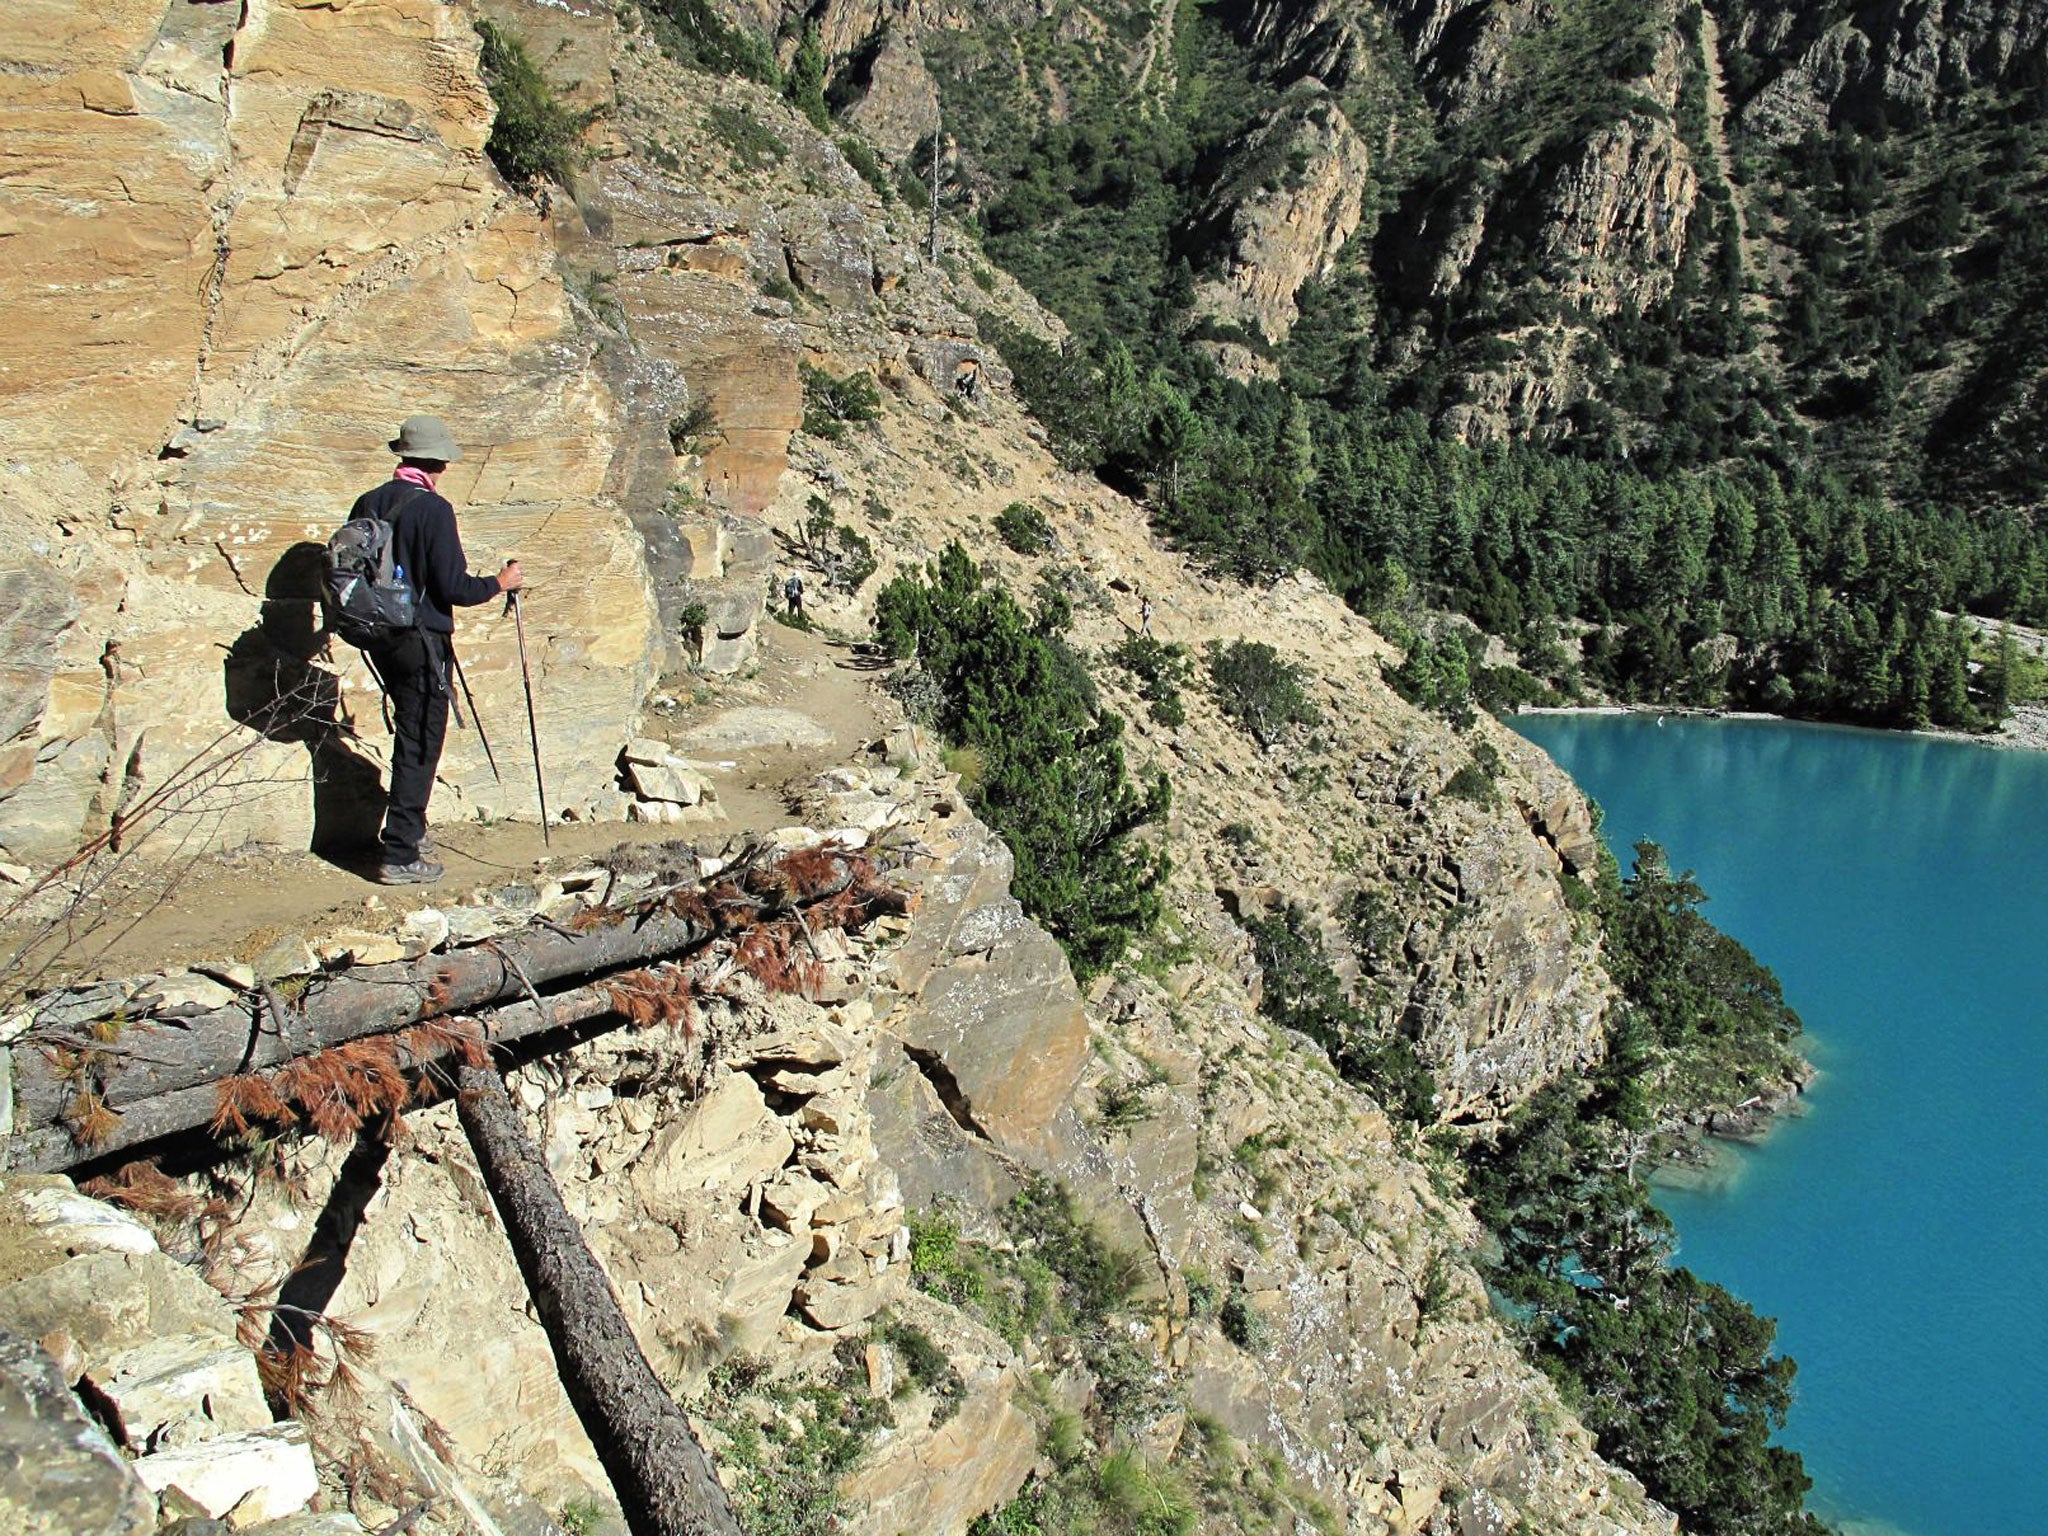 Life on the ledge: taking a cliff path